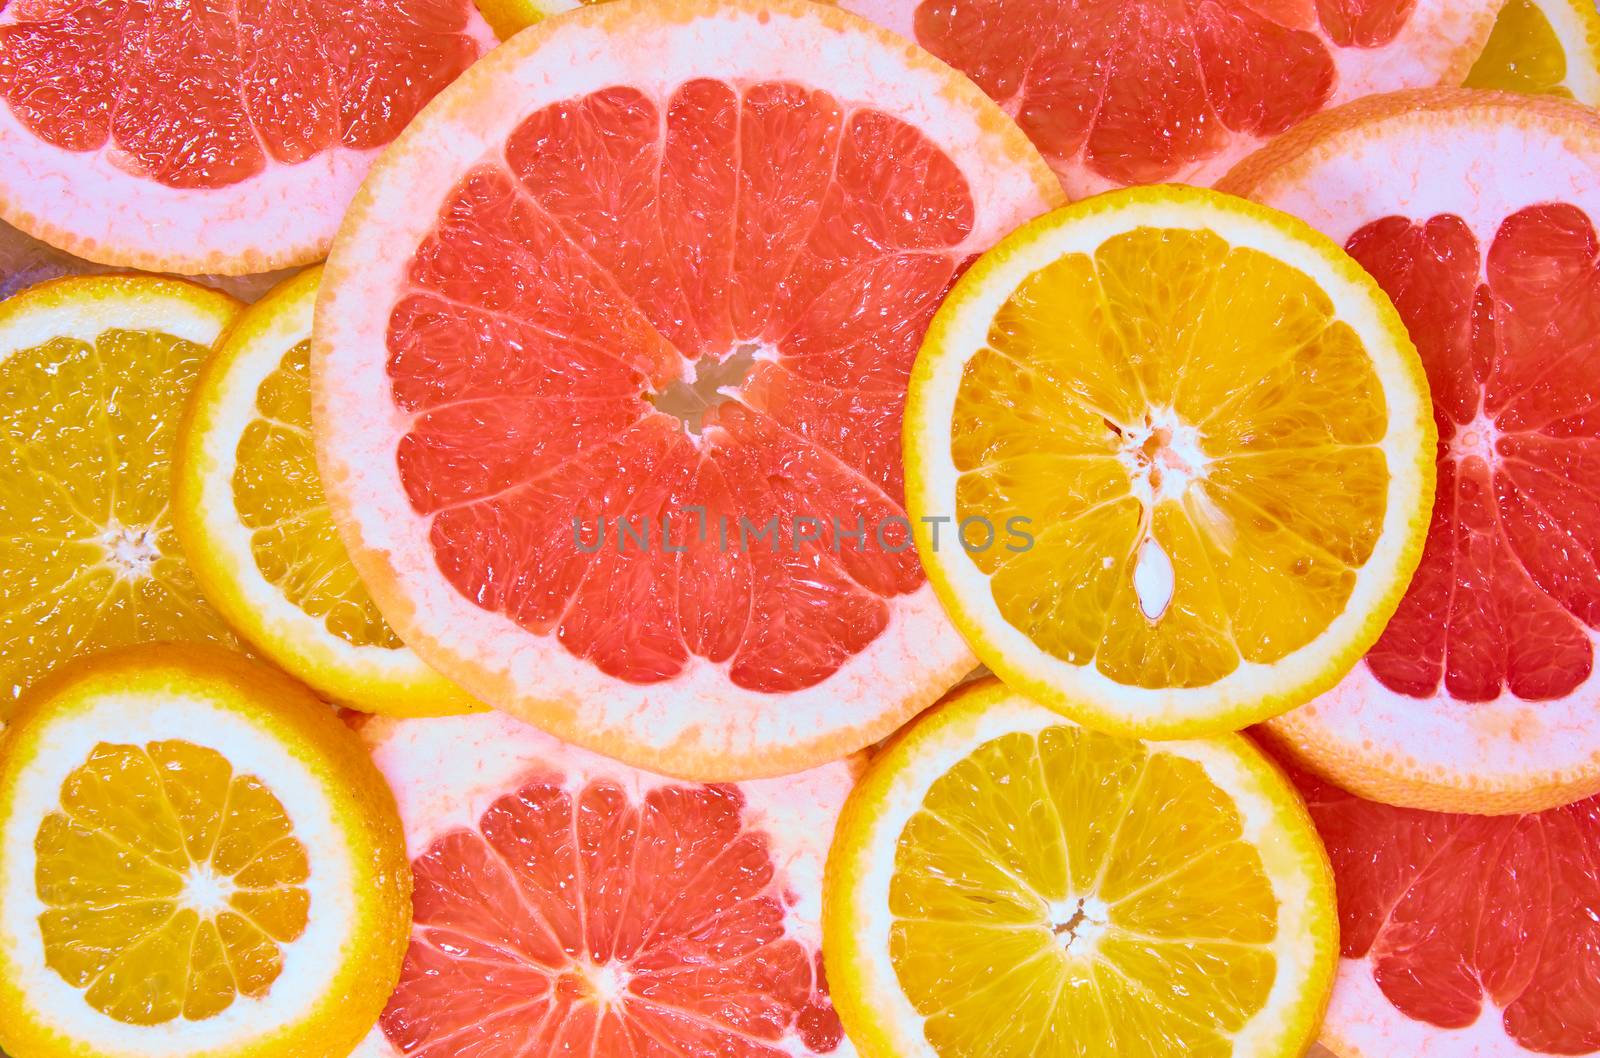 the Orange and grapefruit rings as background